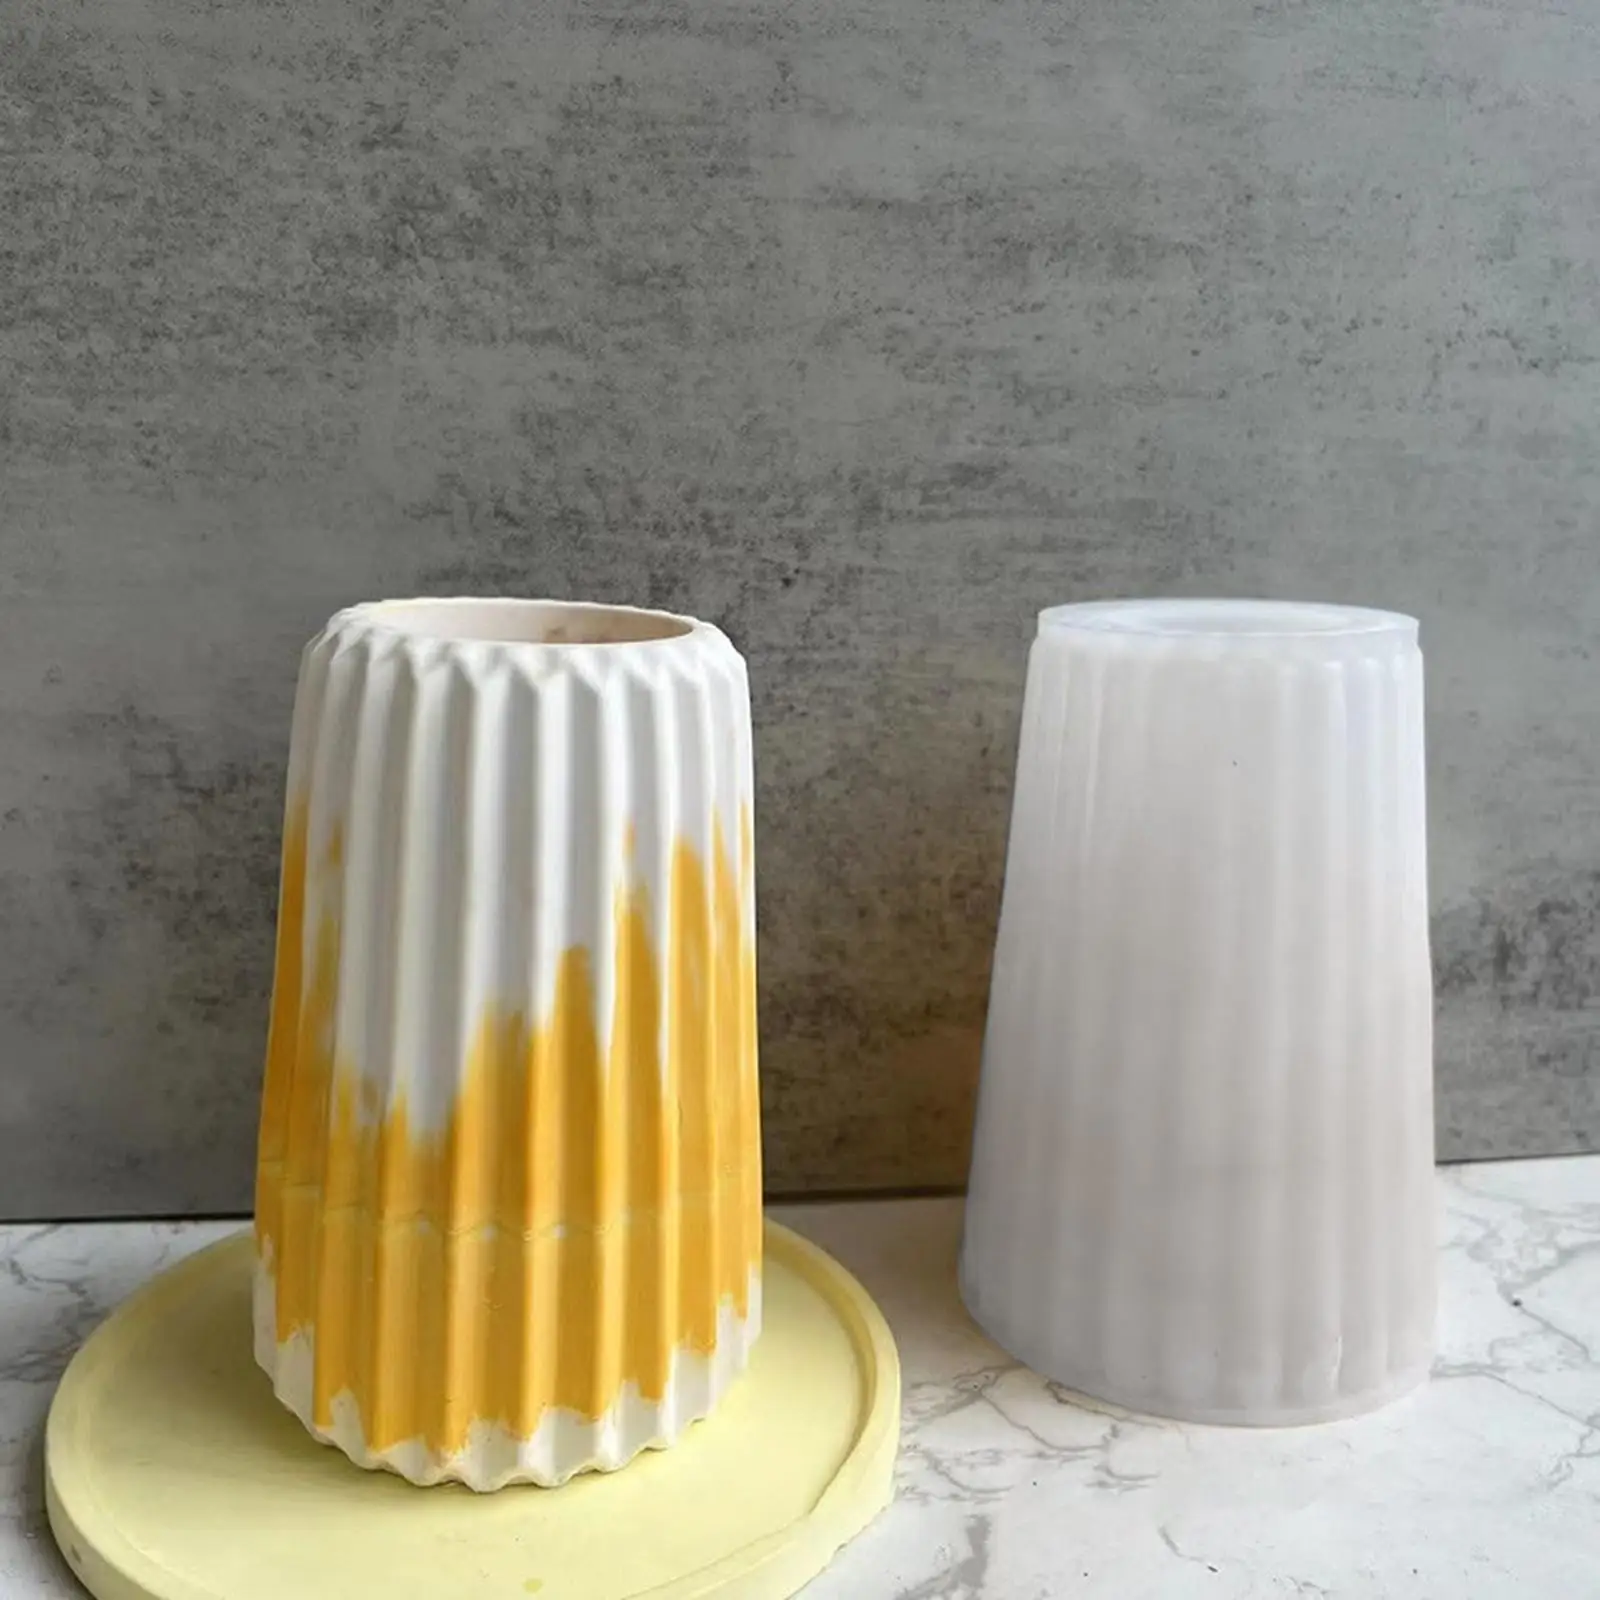 Vase Resin Silicone Mold, Handmade Vertical Stripes, Concrete Mould for Housewarming